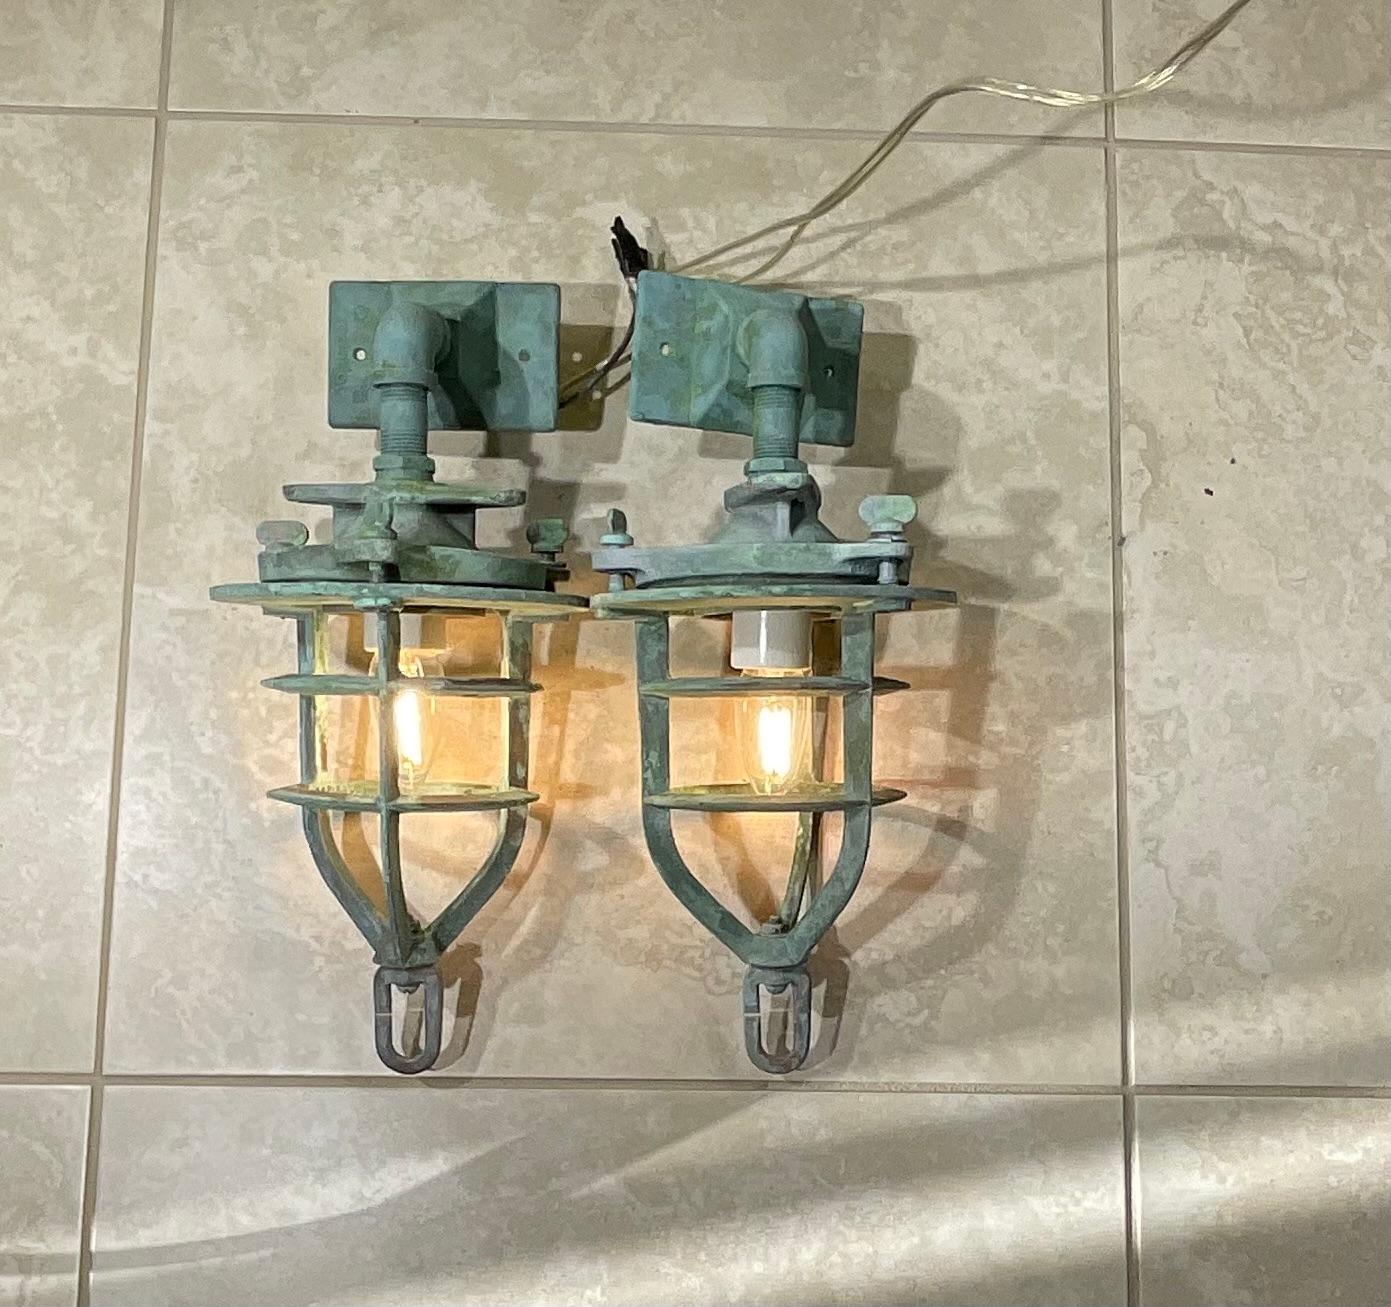 
Original marine convoy lights from a ship , original solid bronze cage. porcelain socket  for one 60/watt light. Beautiful patina .
Steel Backplate size 5” x3”
Glass compartment is not included